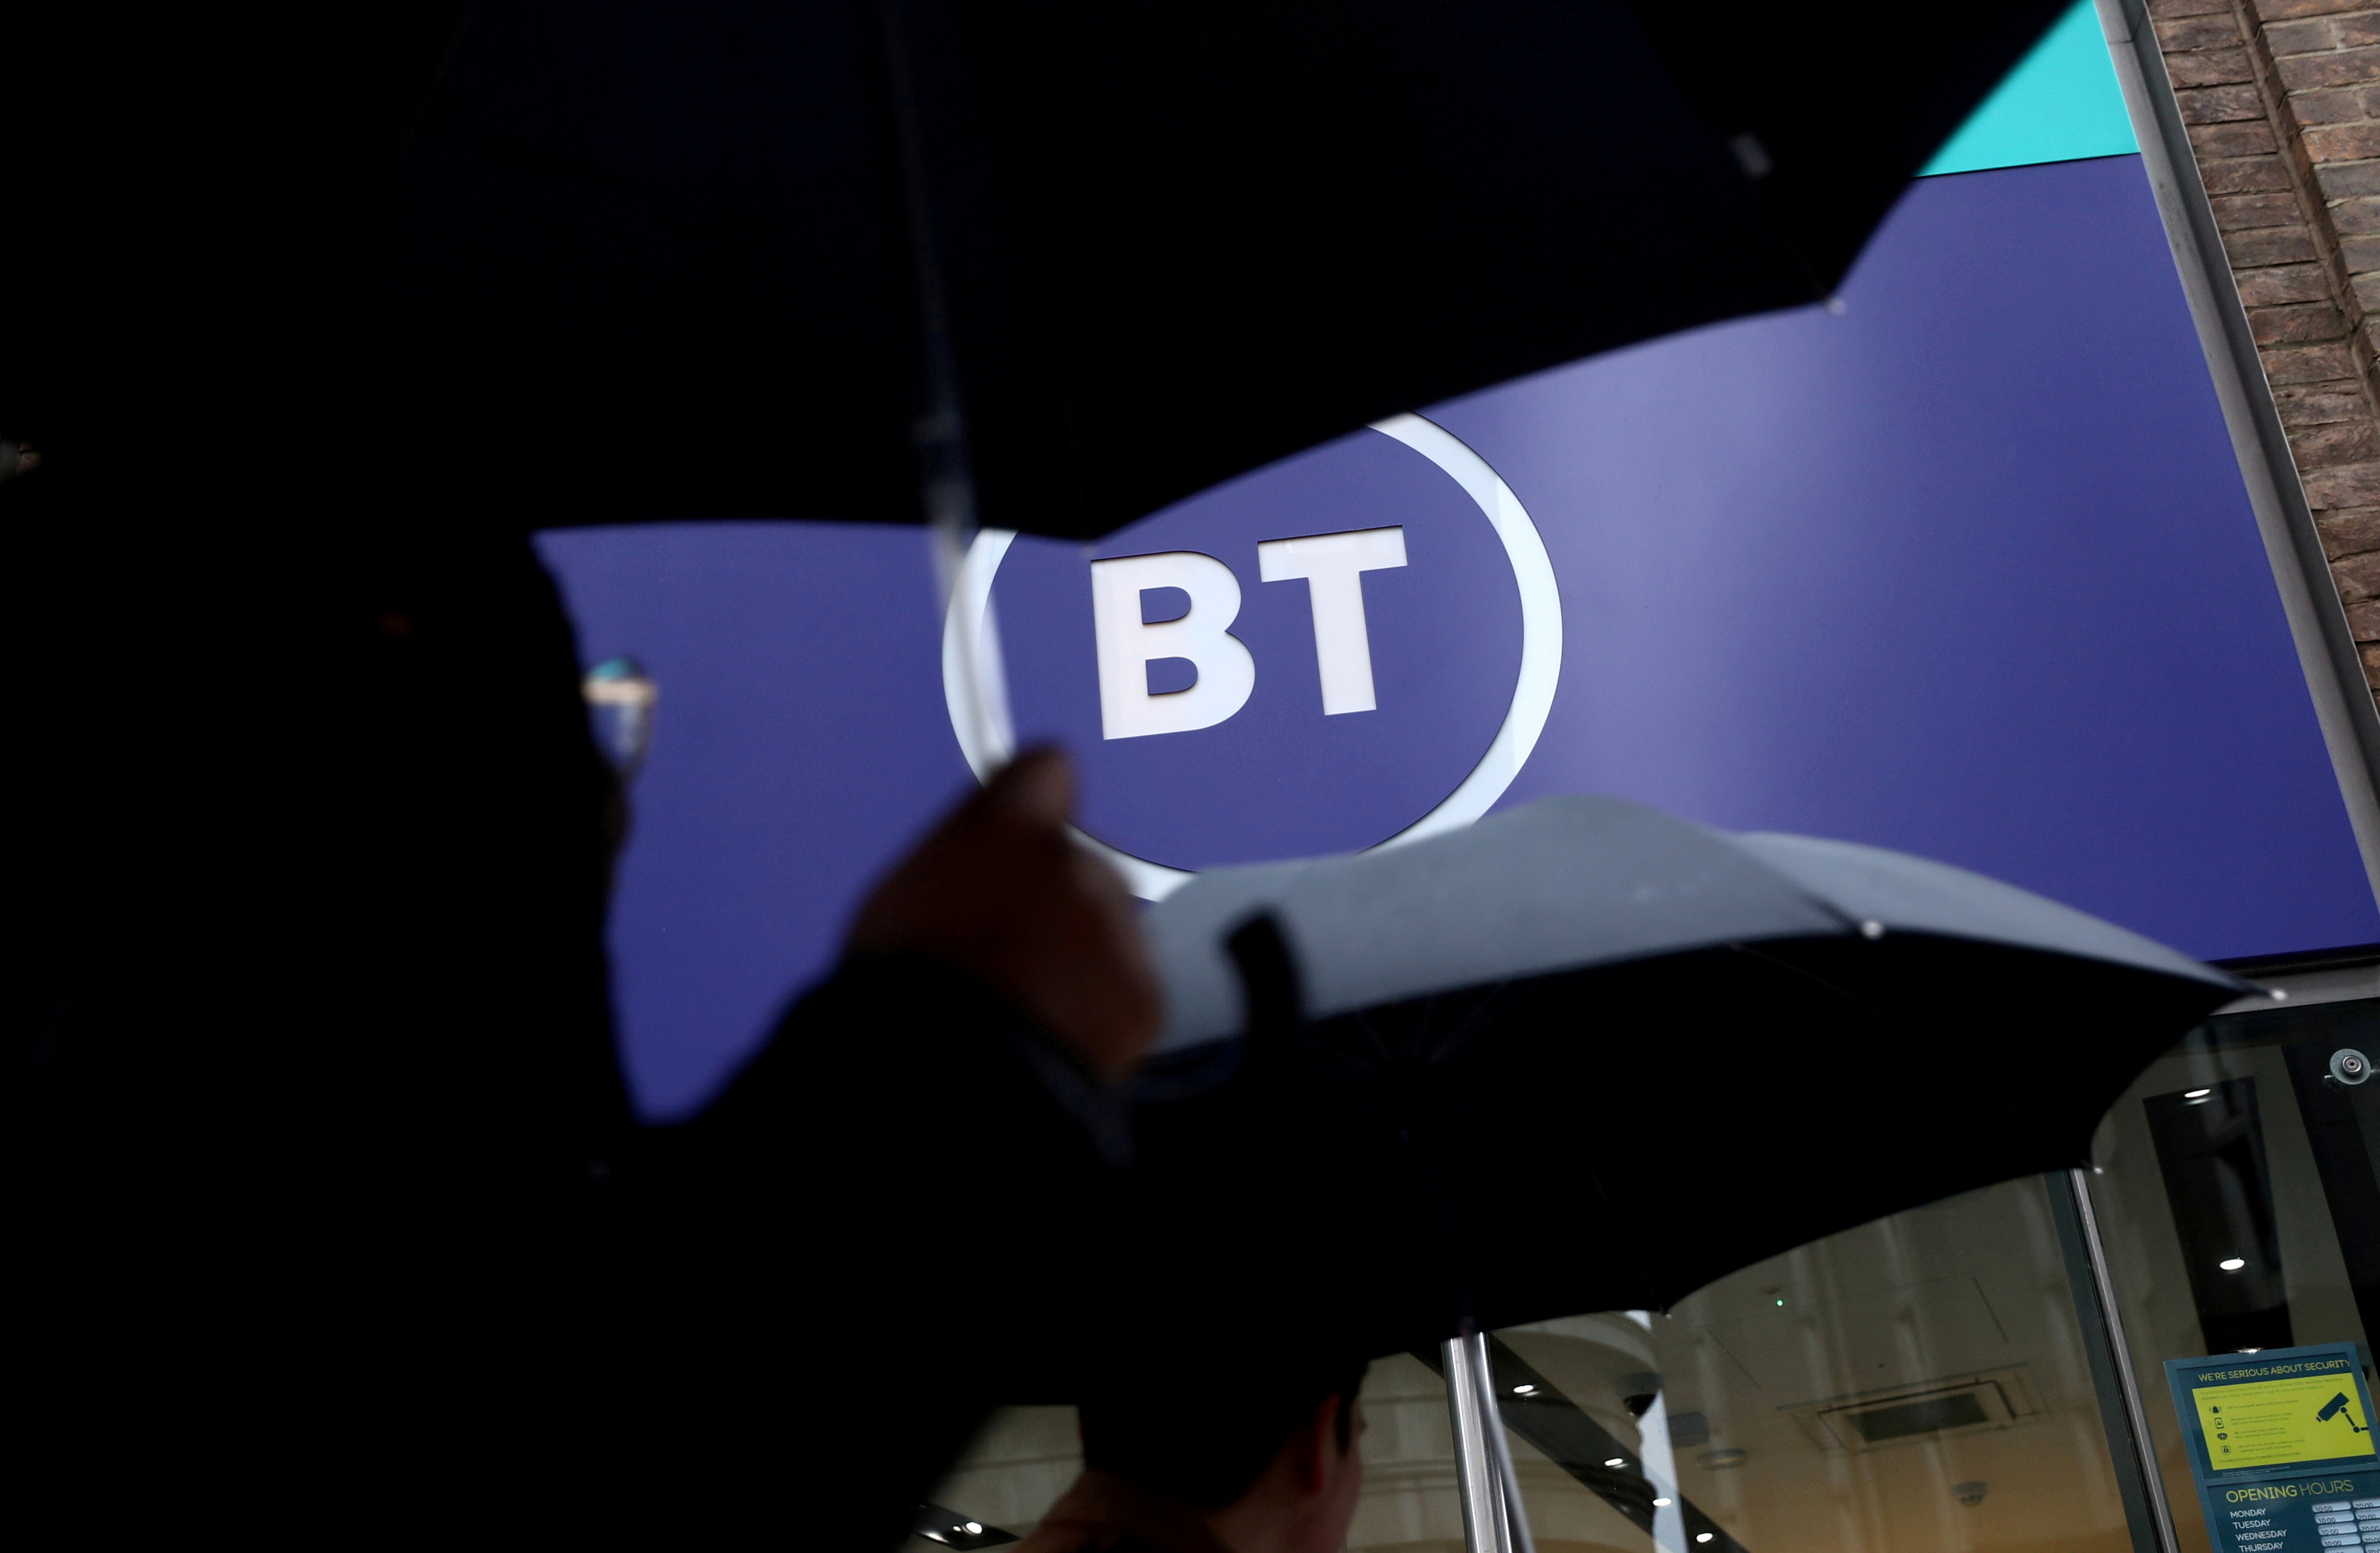 Logo of British Telecom (BT) is displayed outside a store in London, Britain, November 15, 2019. REUTERS/Simon Dawson